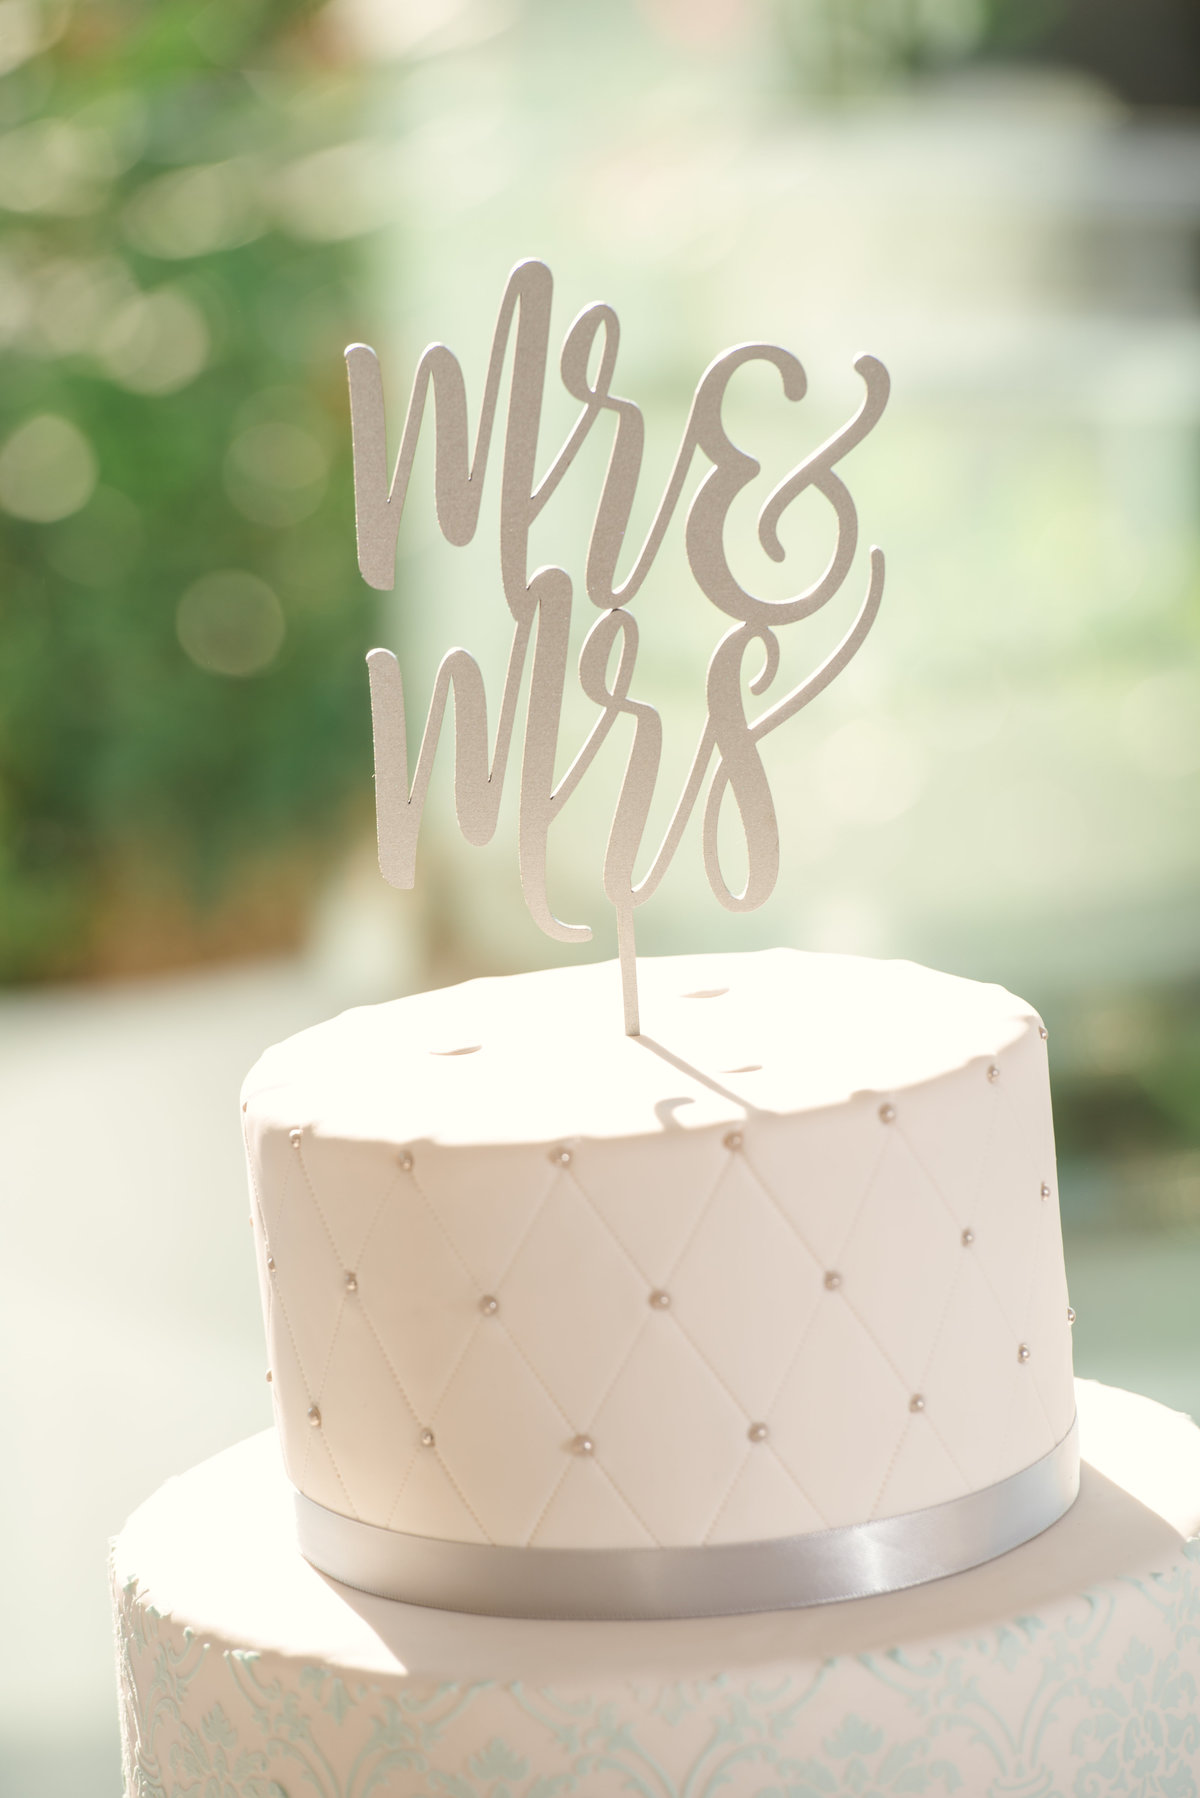 Mr and Mrs cake topped